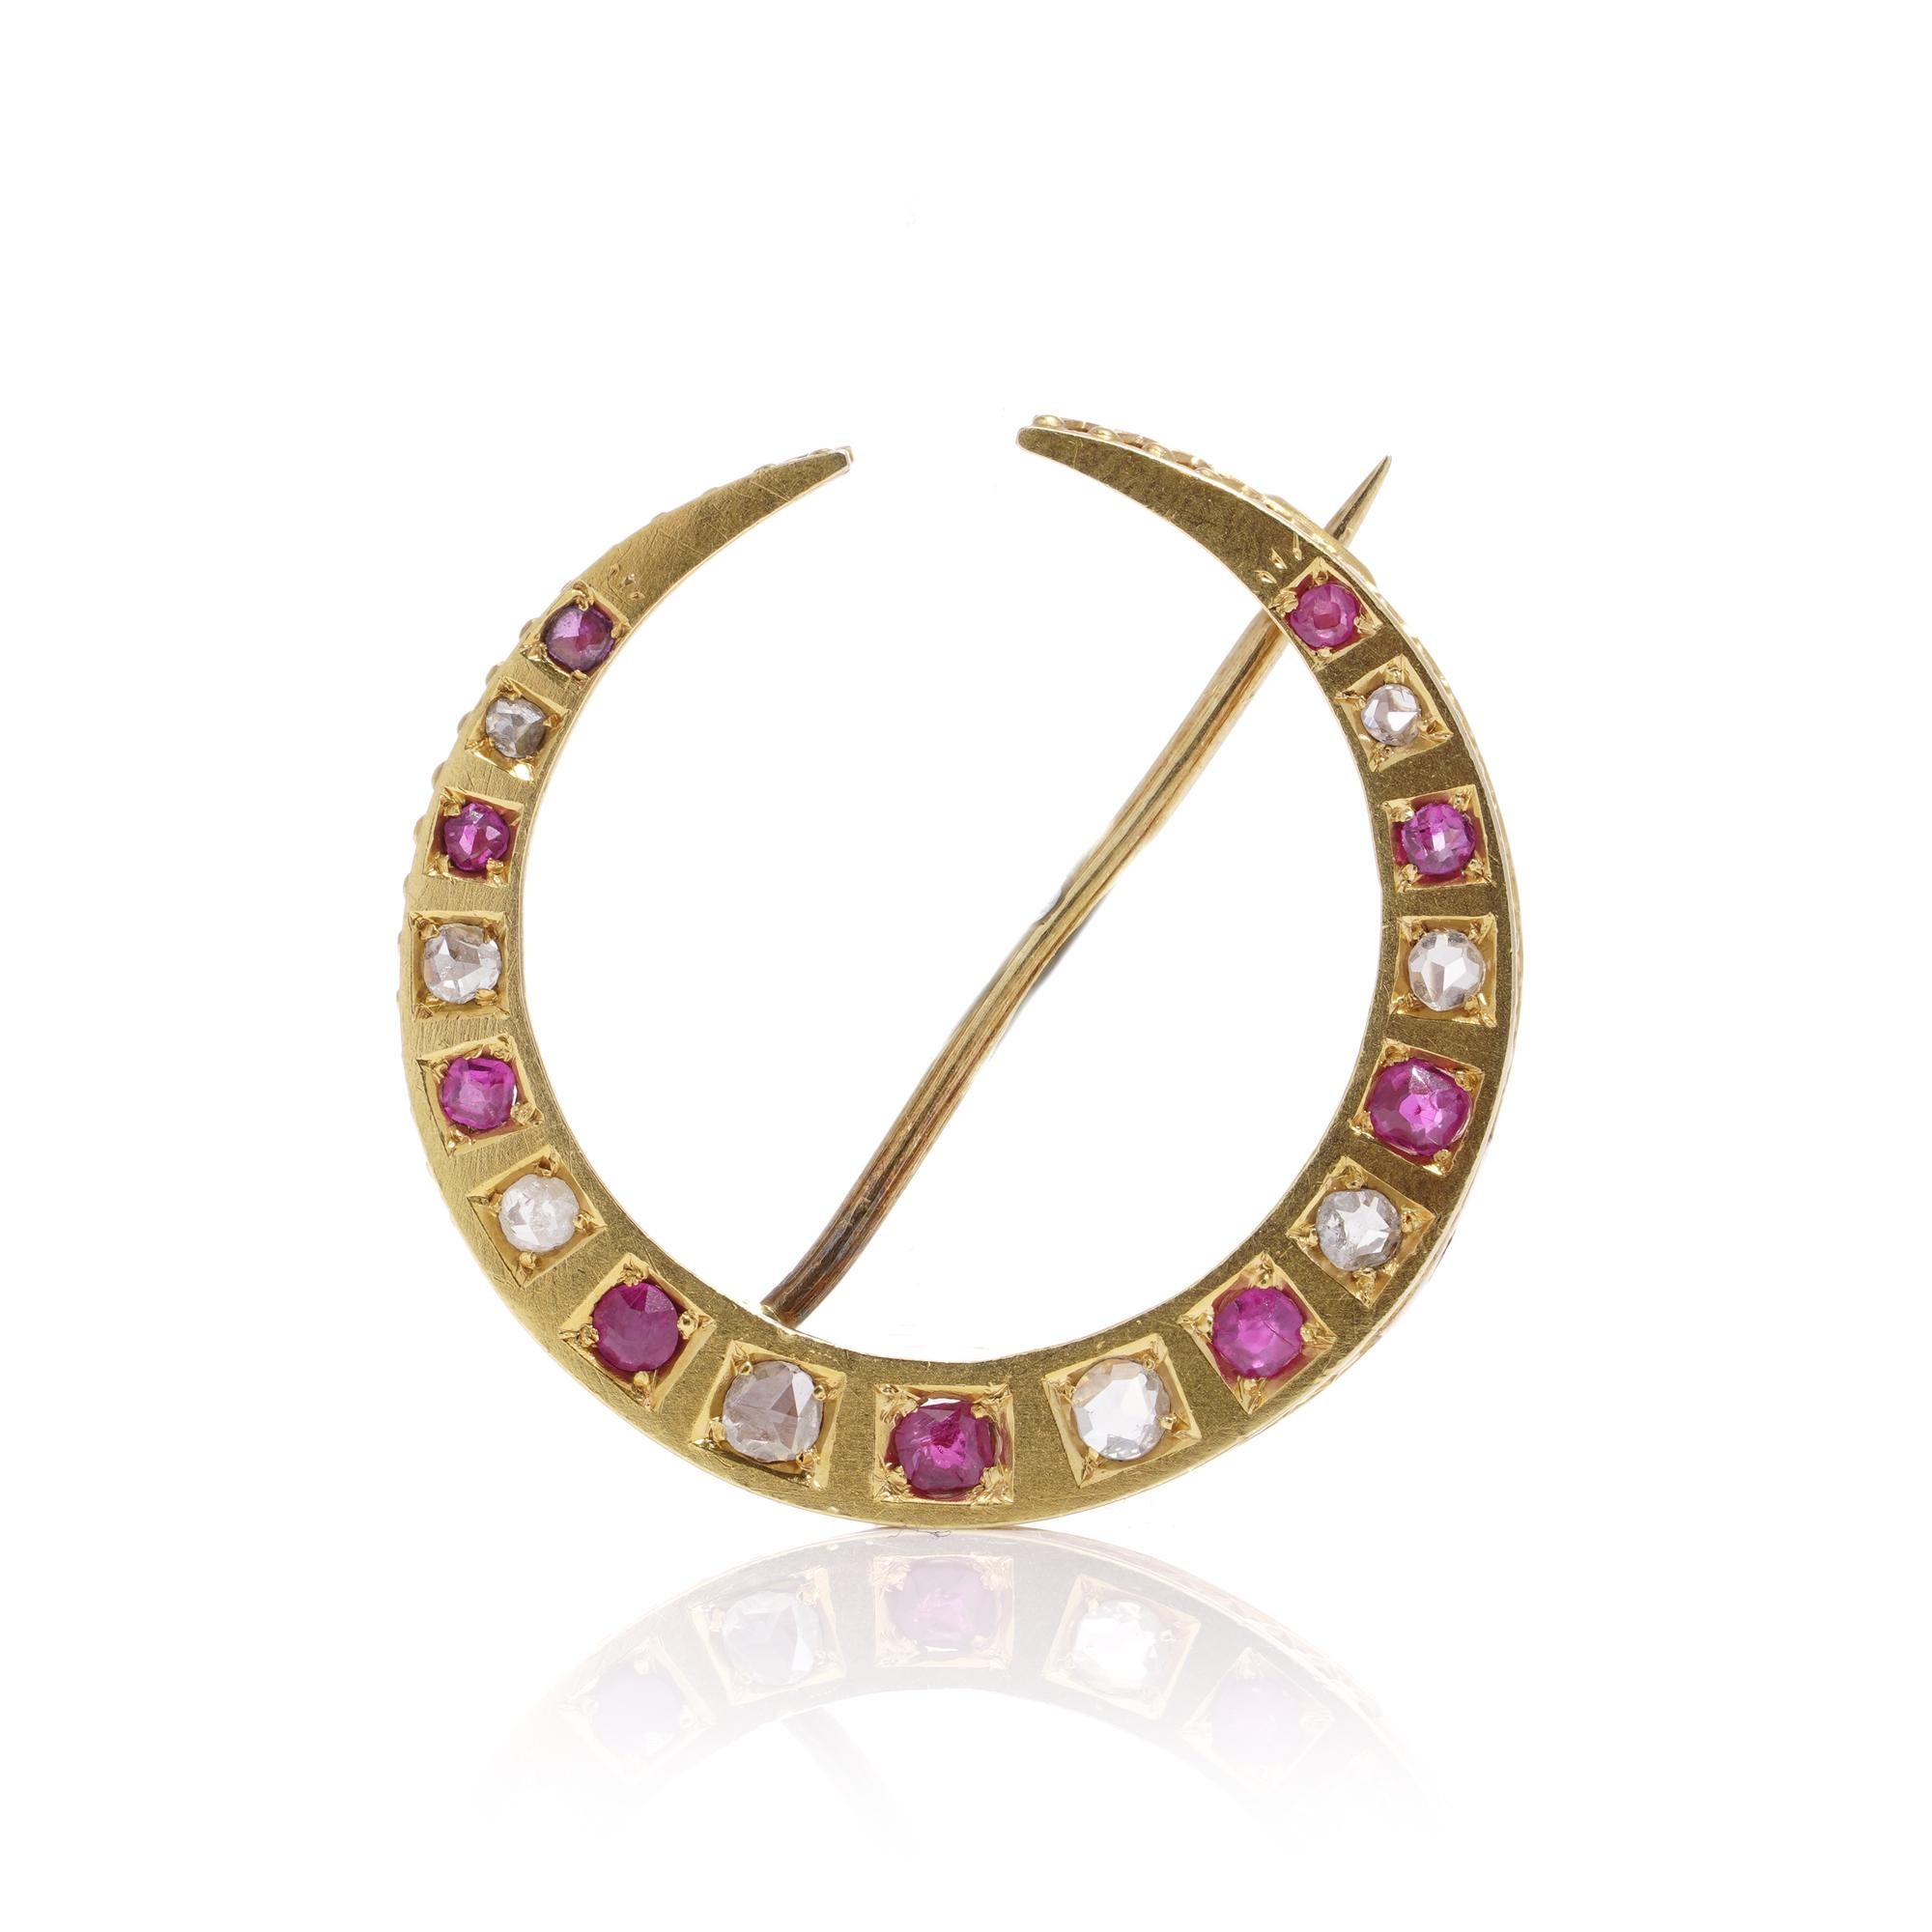 Antique Victorian 18kt yellow gold rose - cut diamond and round faceted ruby crescent brooch with safety pin chain. 

Dimensions:
Width: 2.7 cm
Height: 2.7 cm
Total weight: 4.00 grams 

Rubies  -
Quantity: 9 
Cut: Round faceted 
Carat weight: 0.25